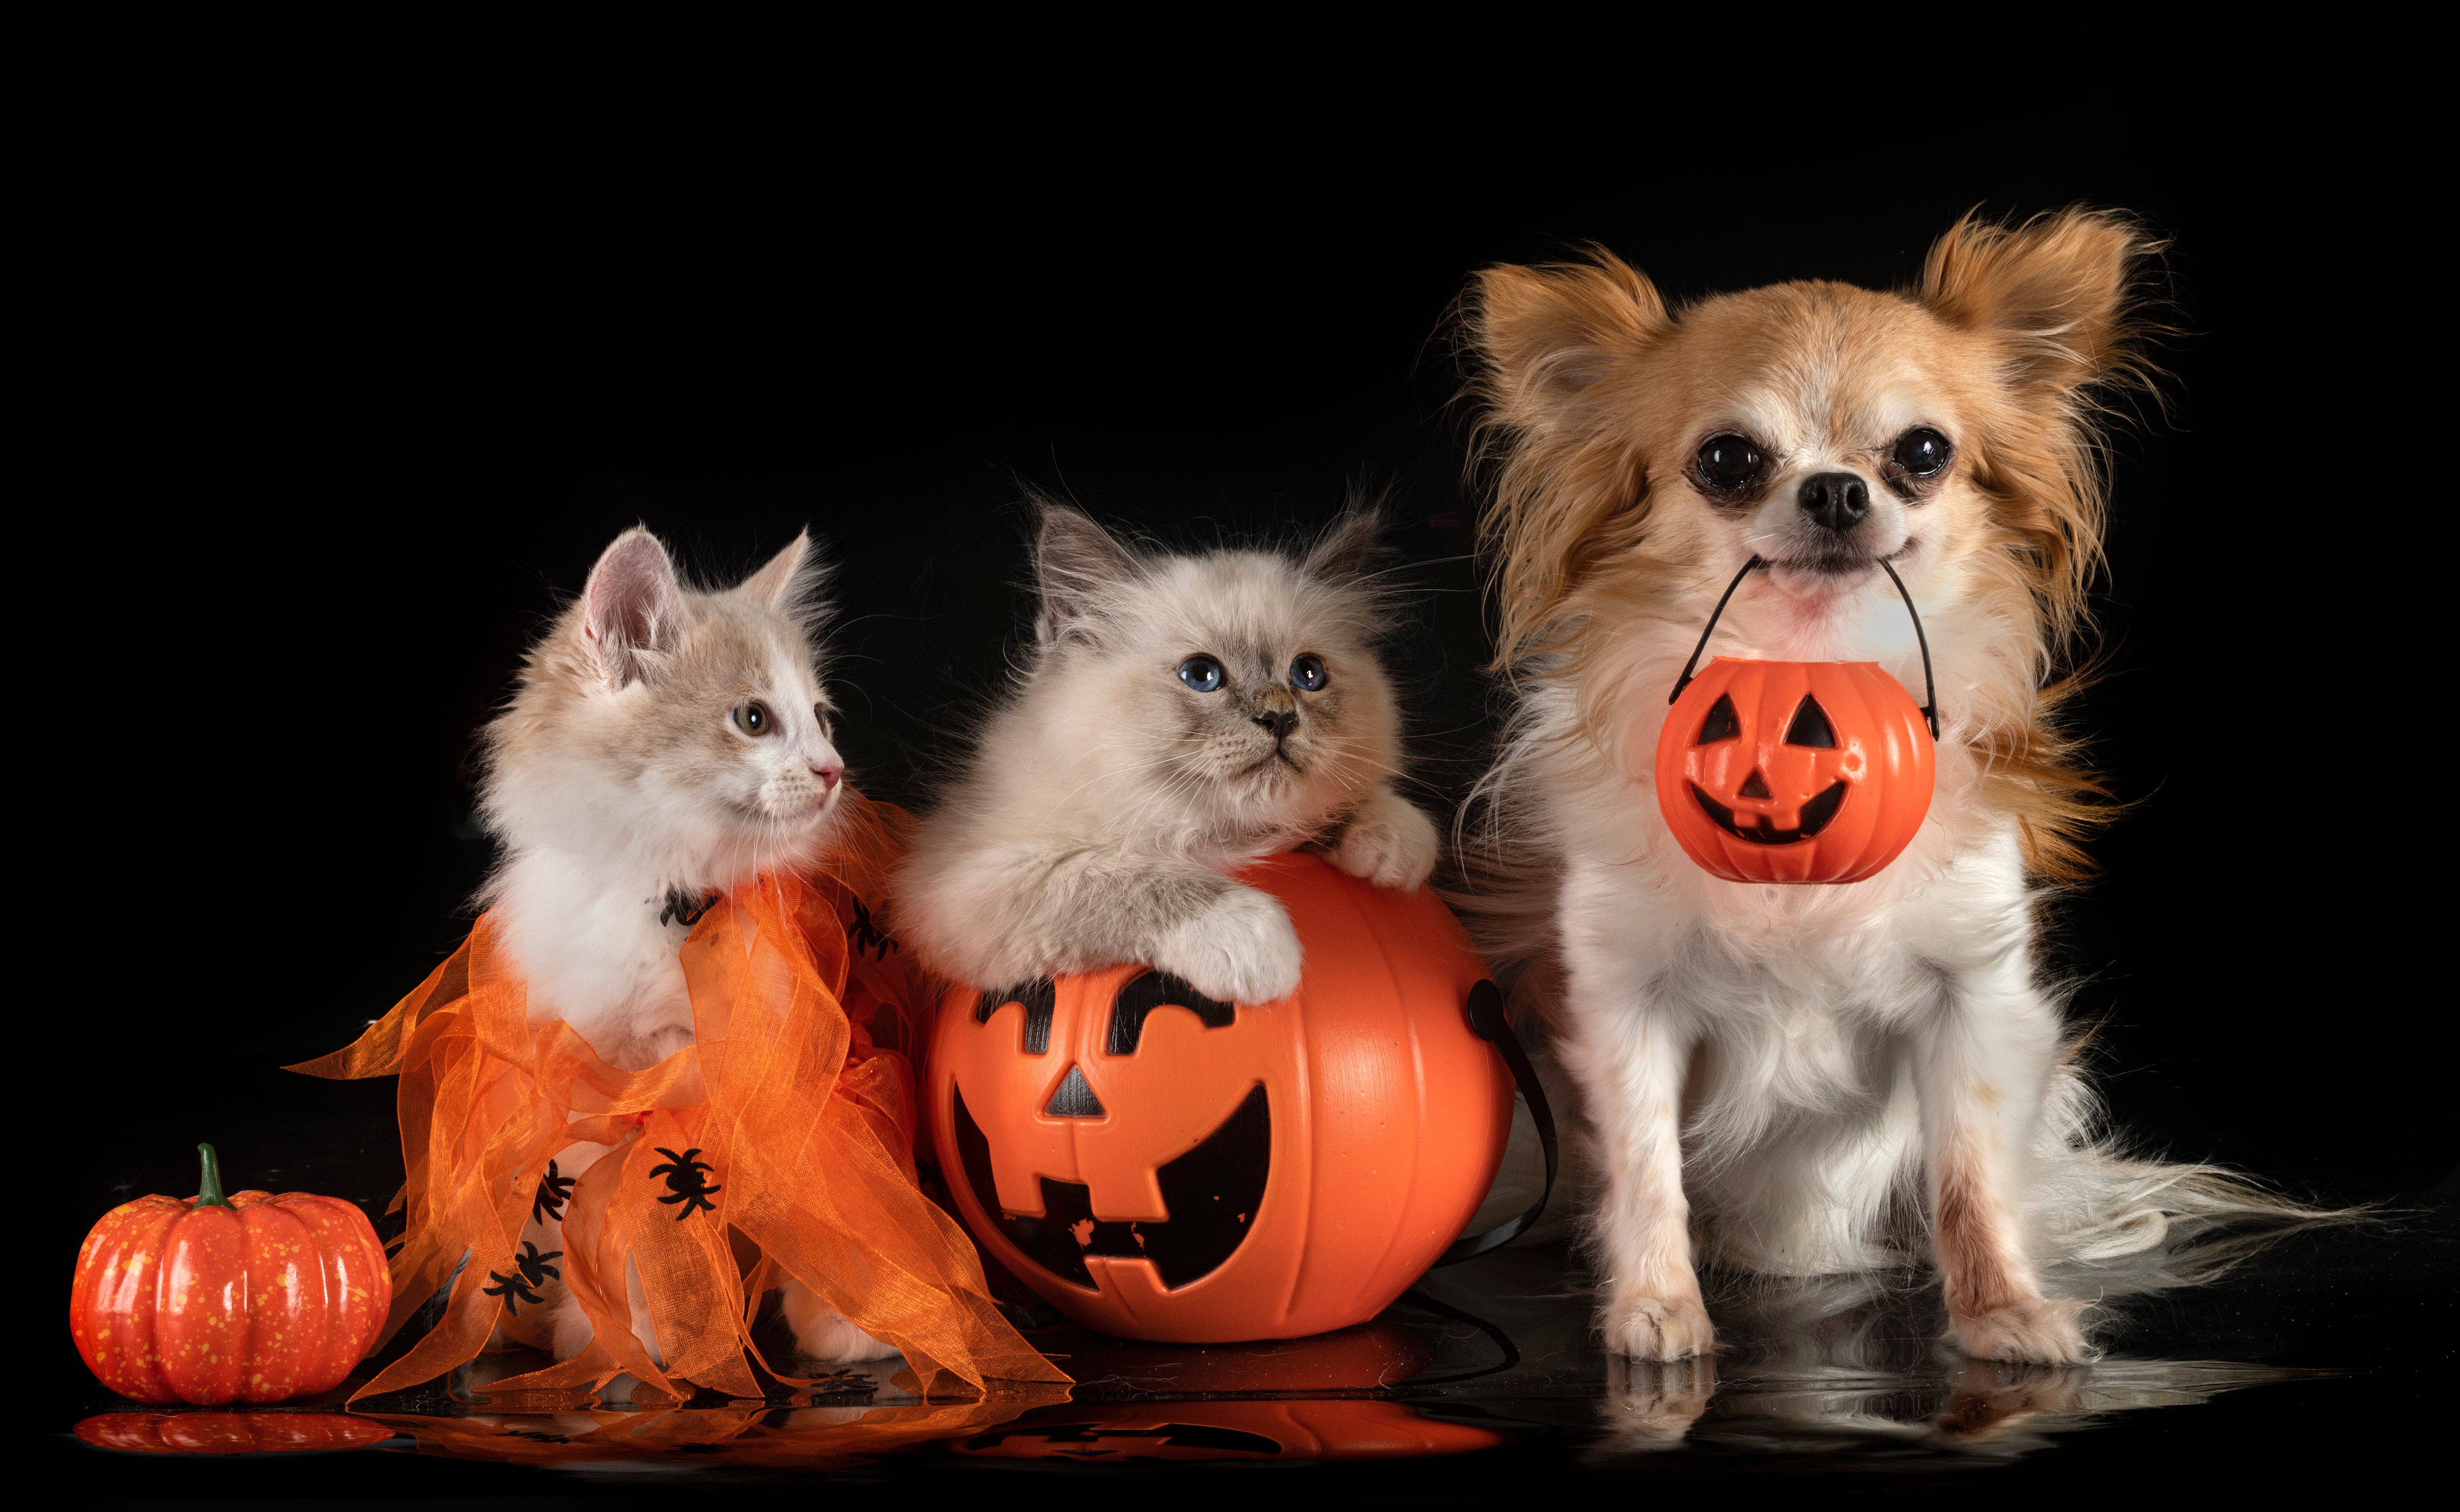 Tall tails: Debunking 5 spooky superstitions about cats and dogs